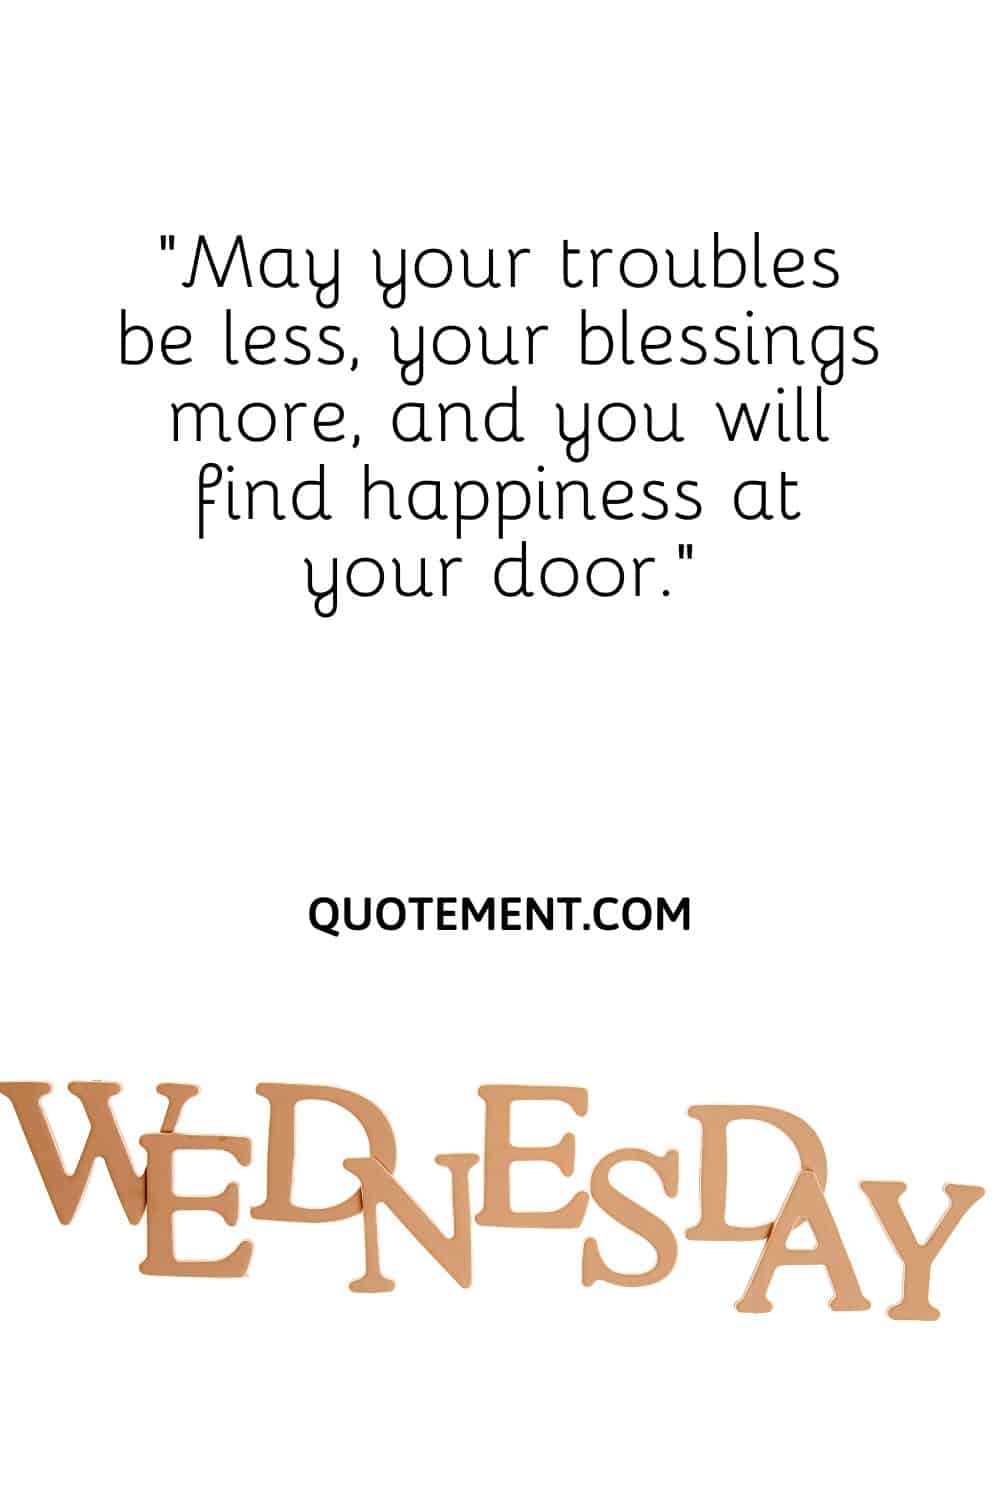 May your troubles be less, your blessings more, and you will find happiness at your door